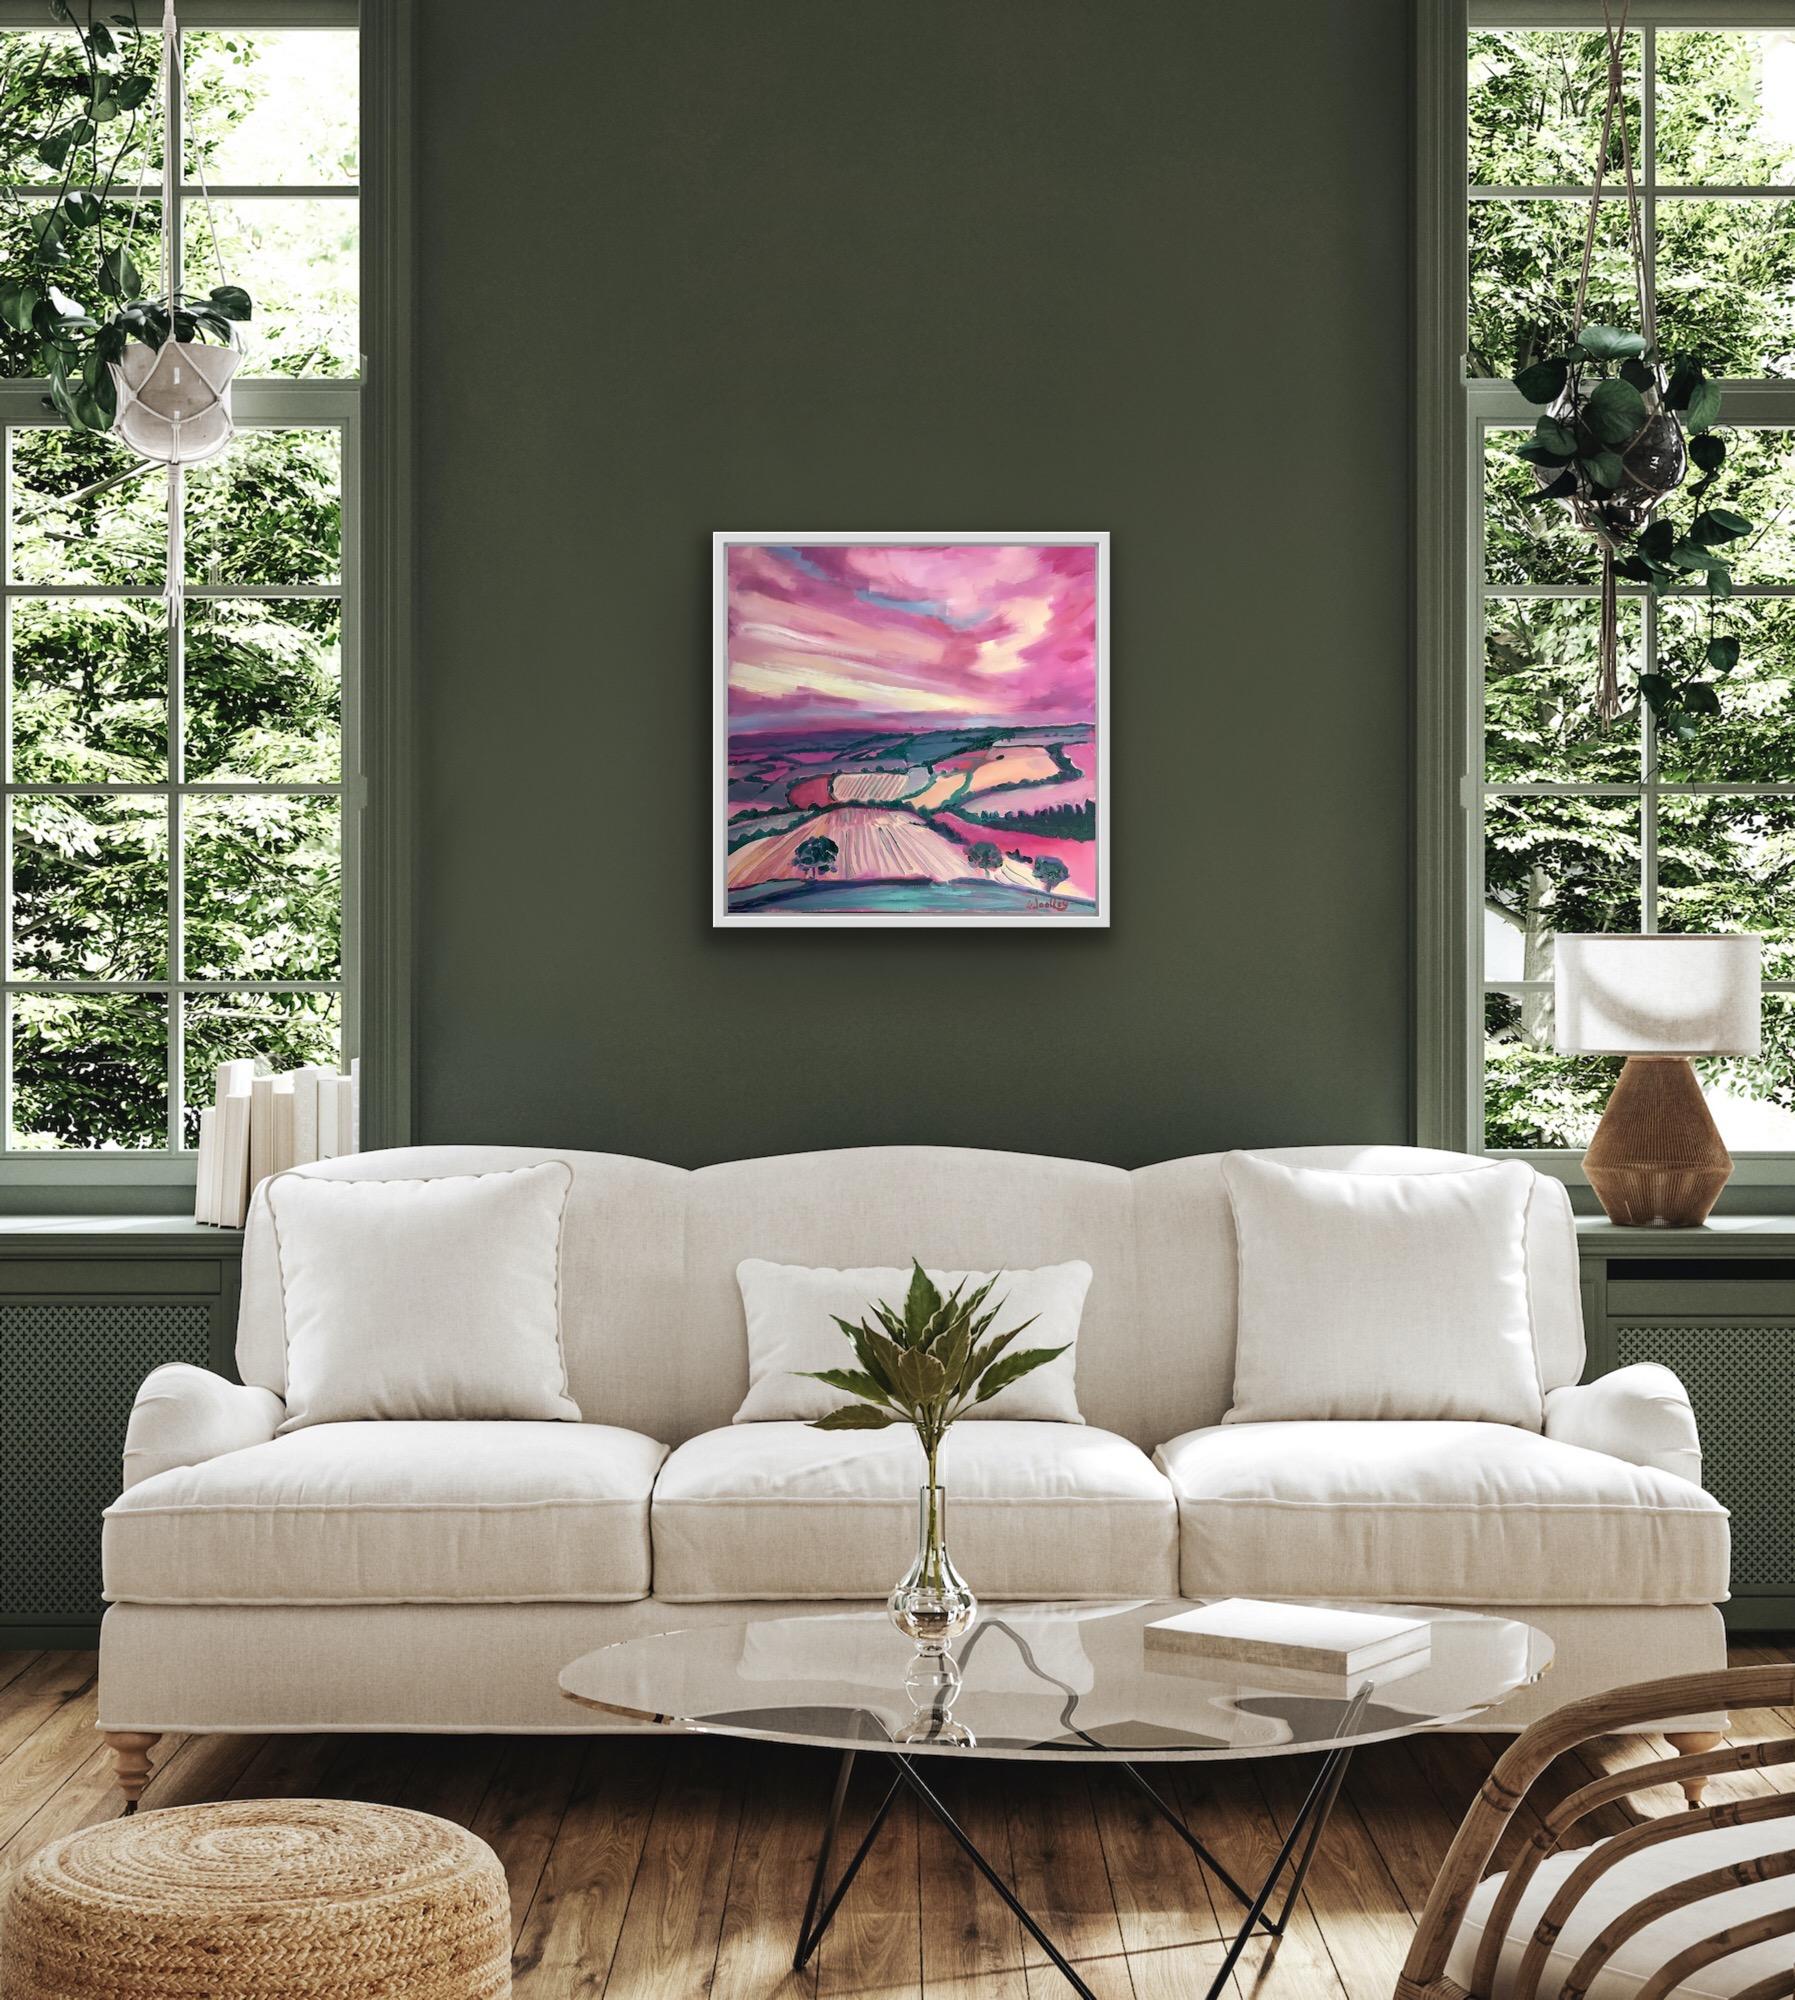 Cotswolds in Pink is an Original Painting by Eleanor Woolley. Inspiration for this Painting is taken from Autumnal walks around Winchcombe this year. Moody pink skies reflect in the magenta fields. The lovely stripes of the ploughed fields lead our